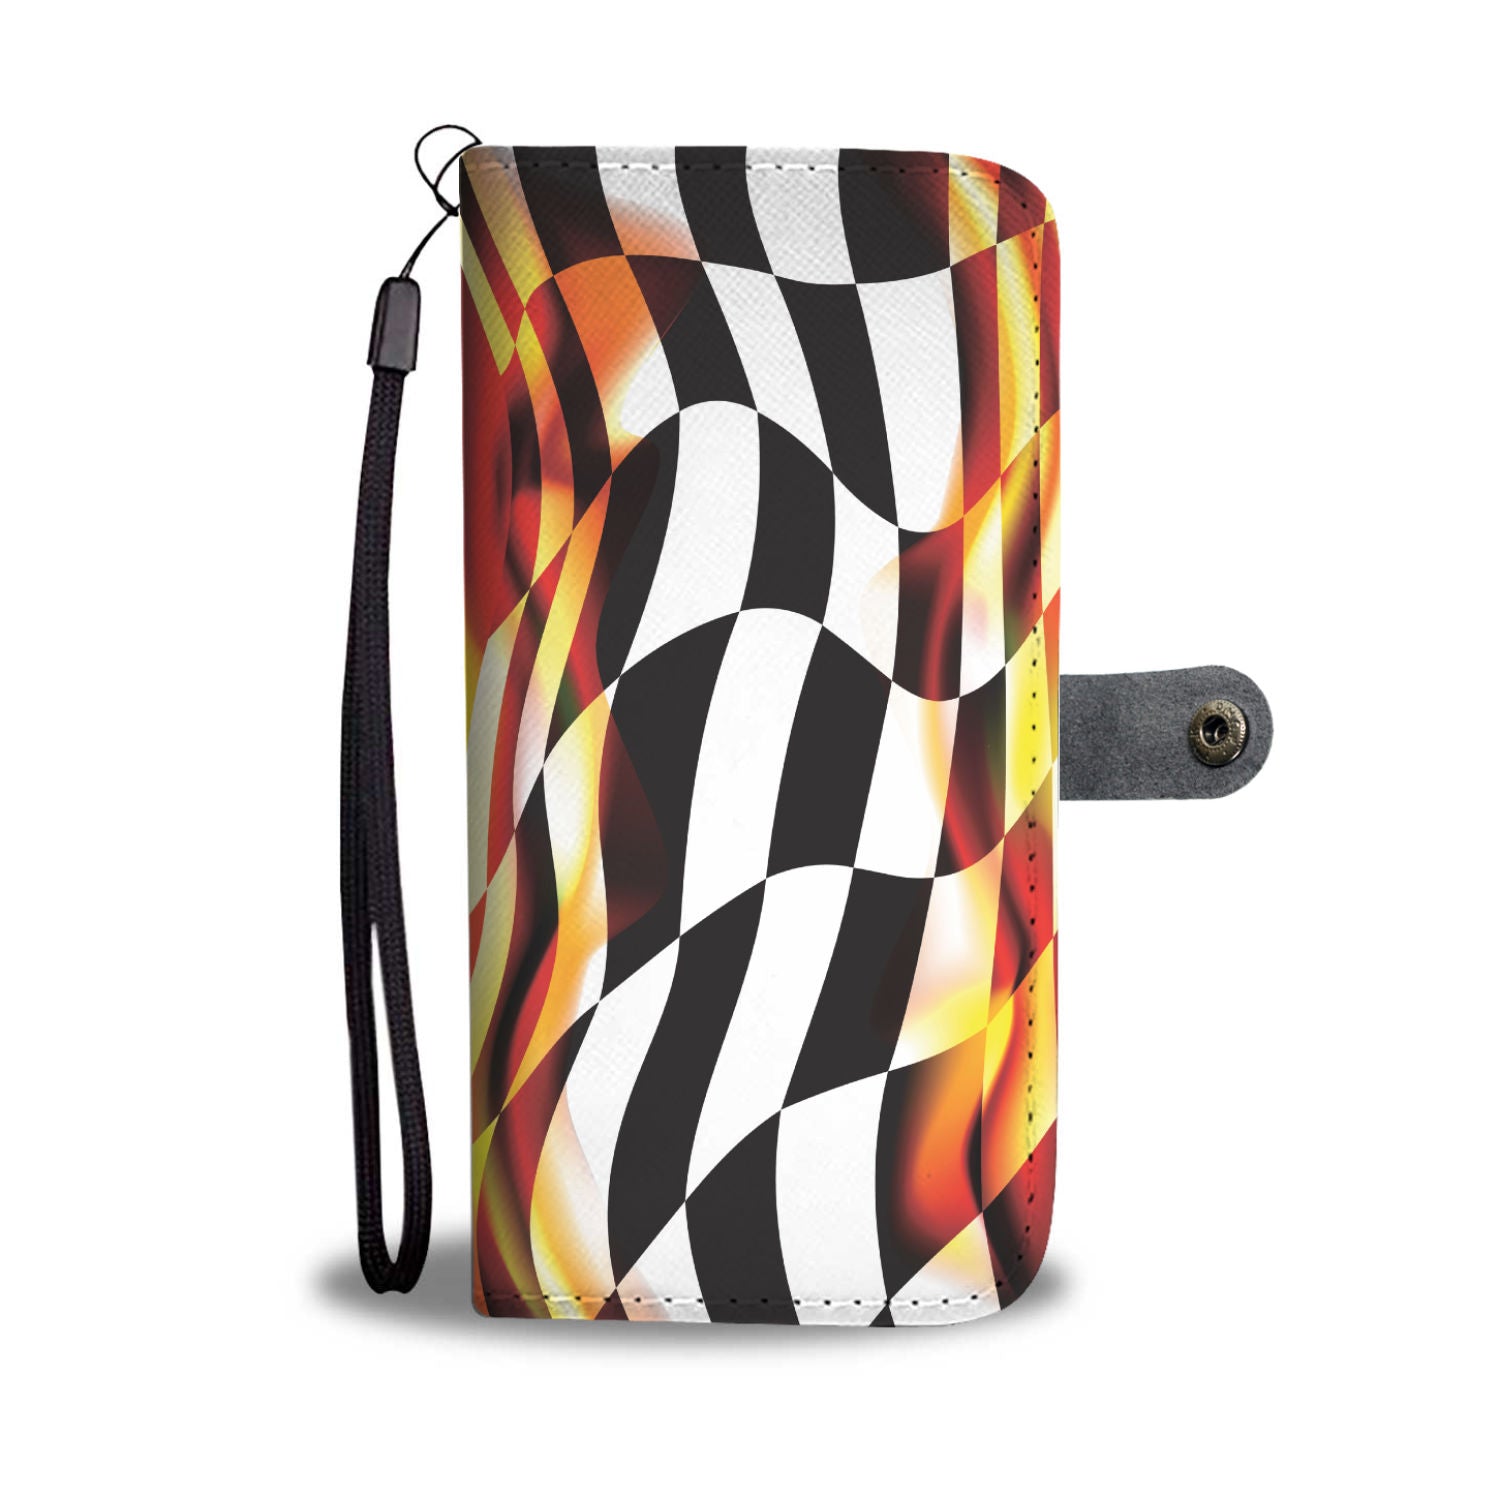 Racing Flag Of Flame Wallet Case